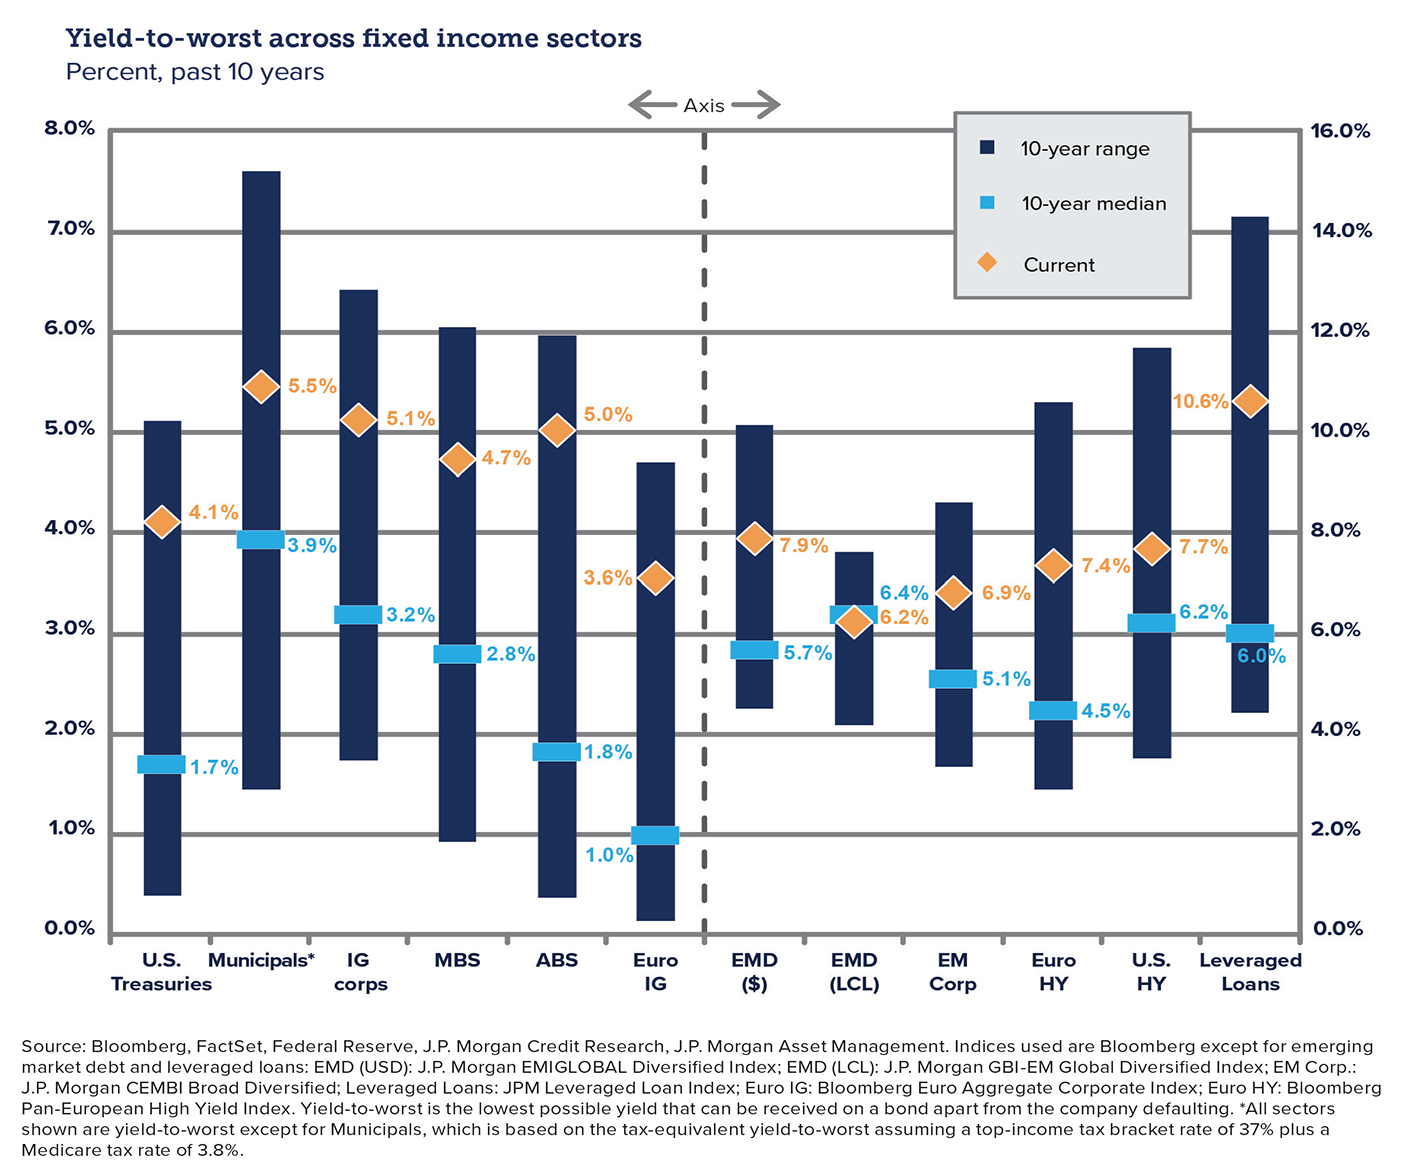 Chart showing yield-to-worst across fixed income sectors